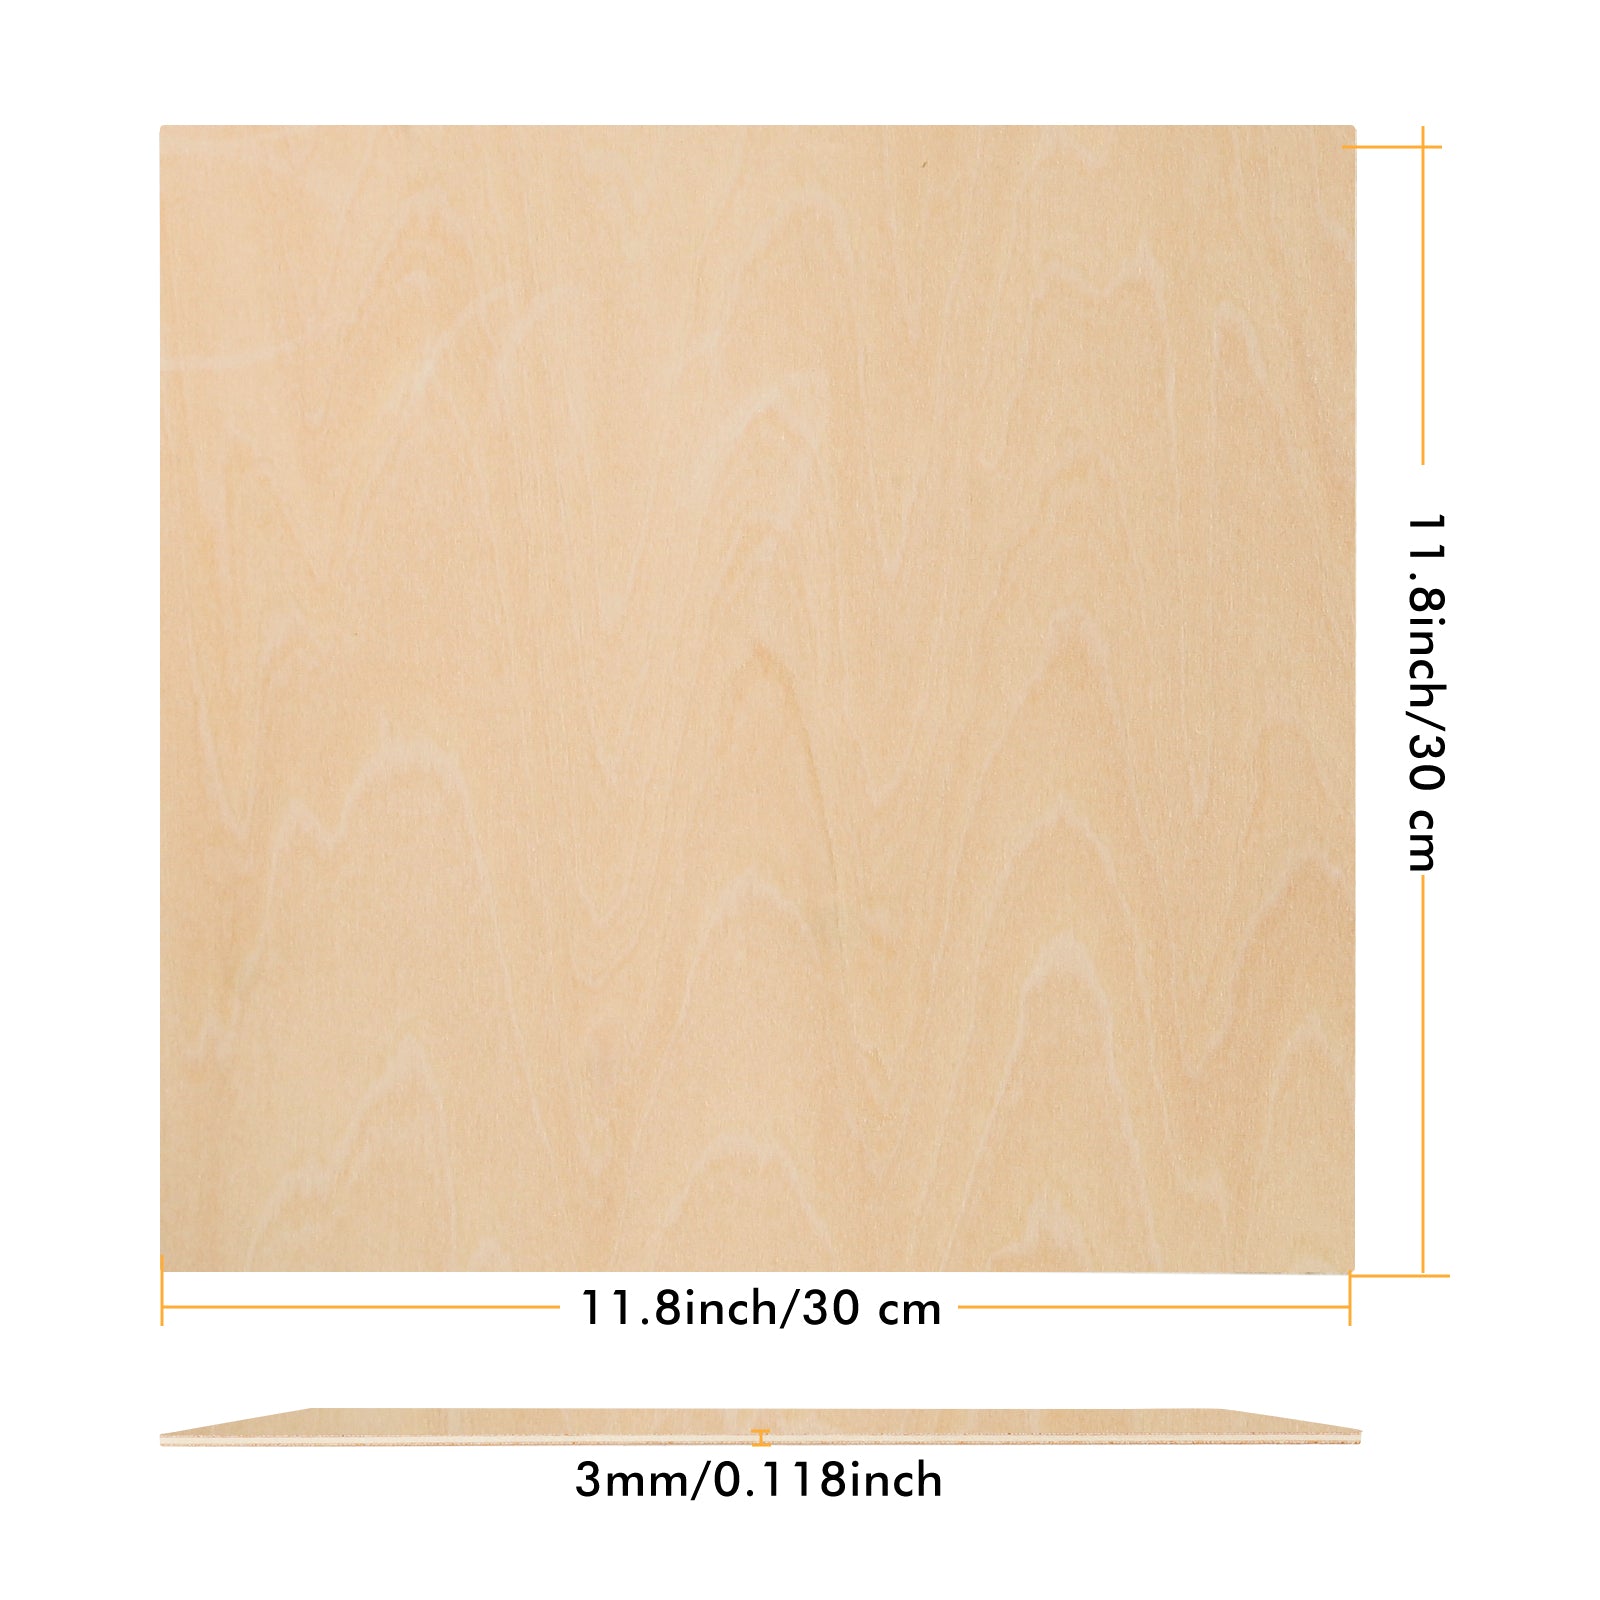 A4 Plywood Sheets 3mm Thickness (+/- 0.2mm) Basswood Plywood 11.8x11.8